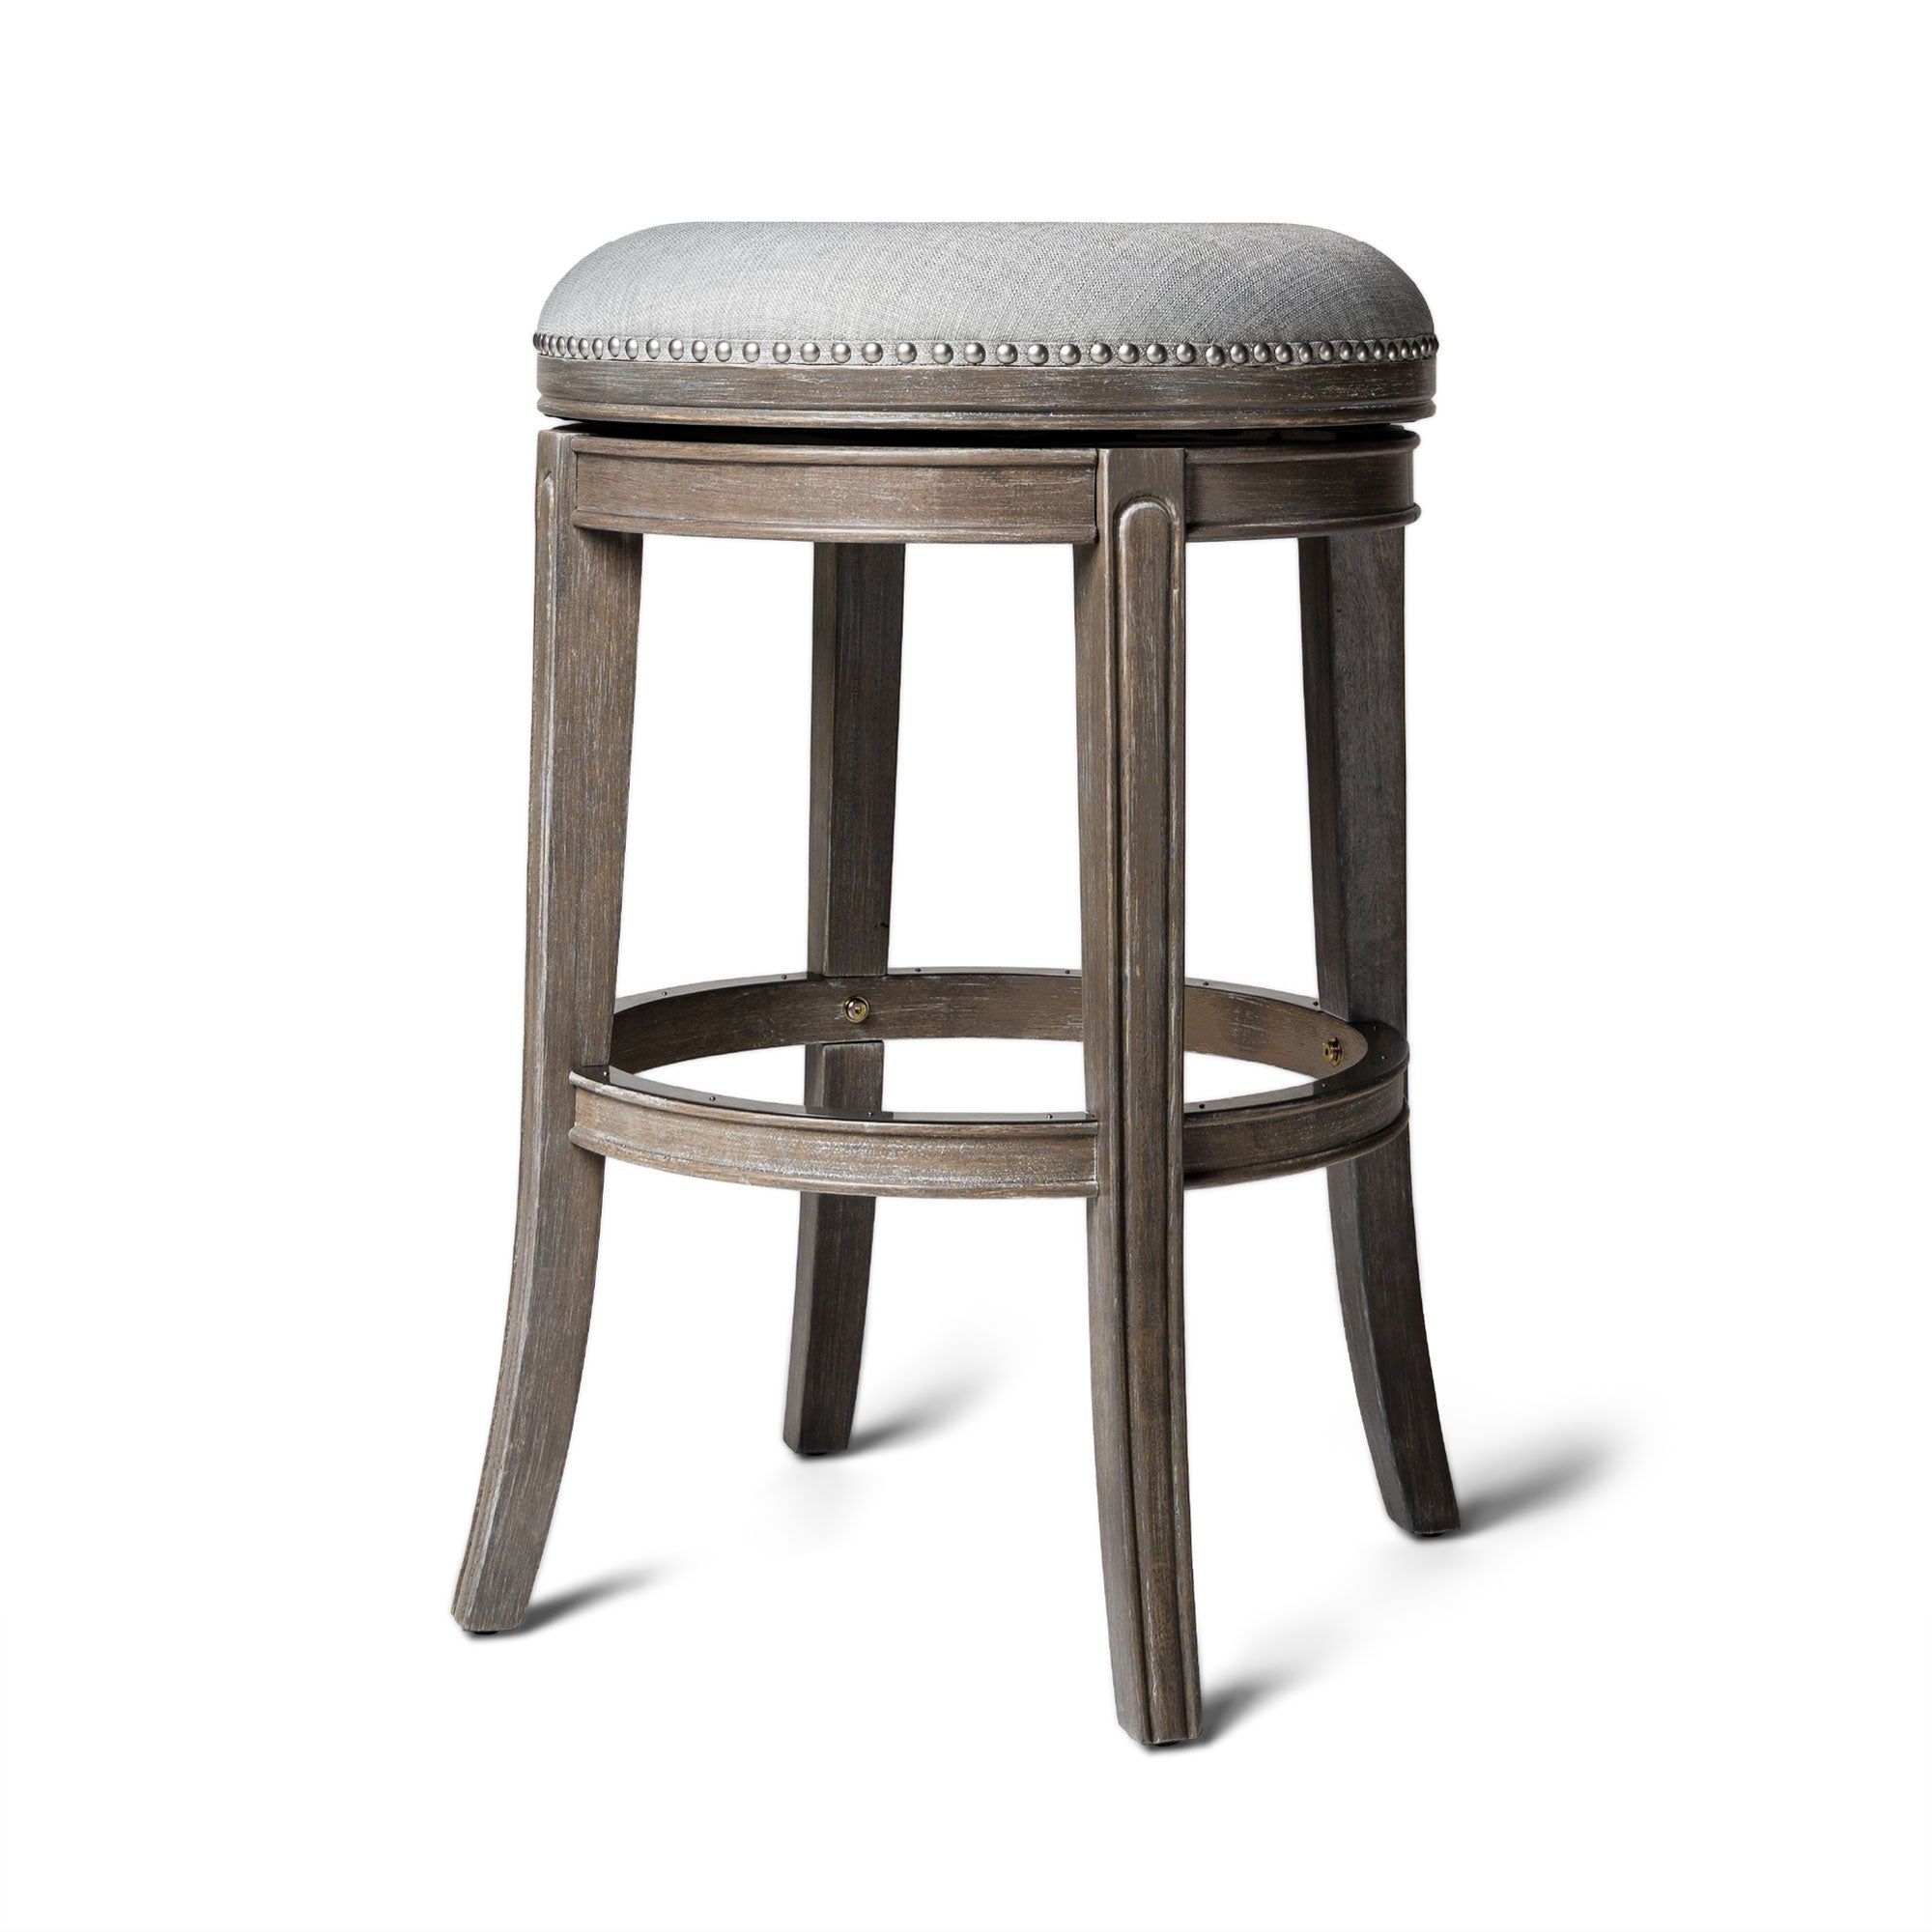 Alexander Backless Bar Stool in Reclaimed Oak Finish with Ash Grey Fabric Upholstery in Stools by Maven Lane